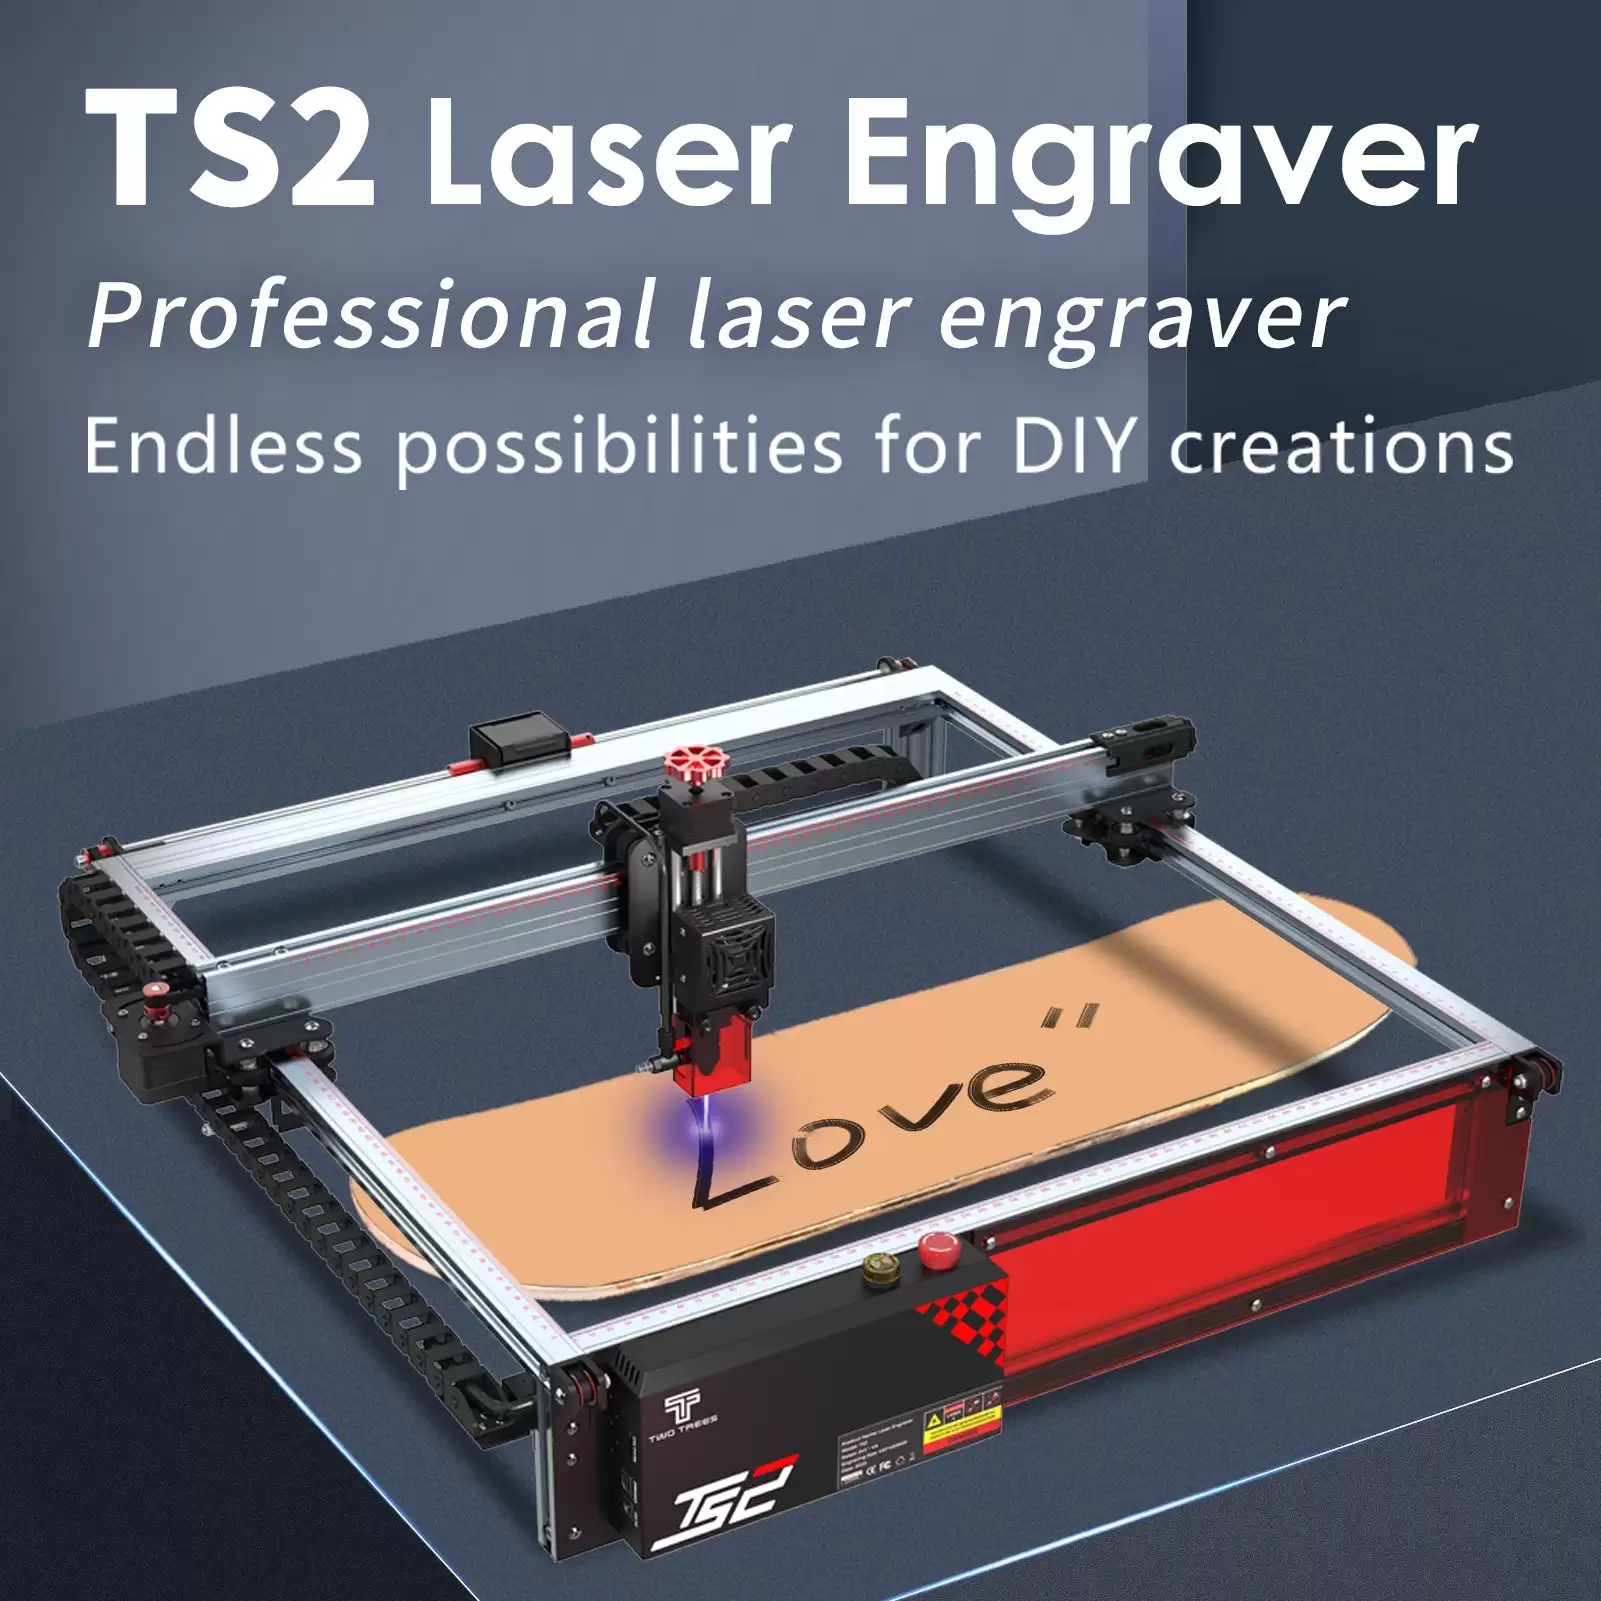 Buy For $412.99 Two Trees Ts2 10w Laser Engraver Cutter ,Free Shipping With This Cafago Discount Voucher